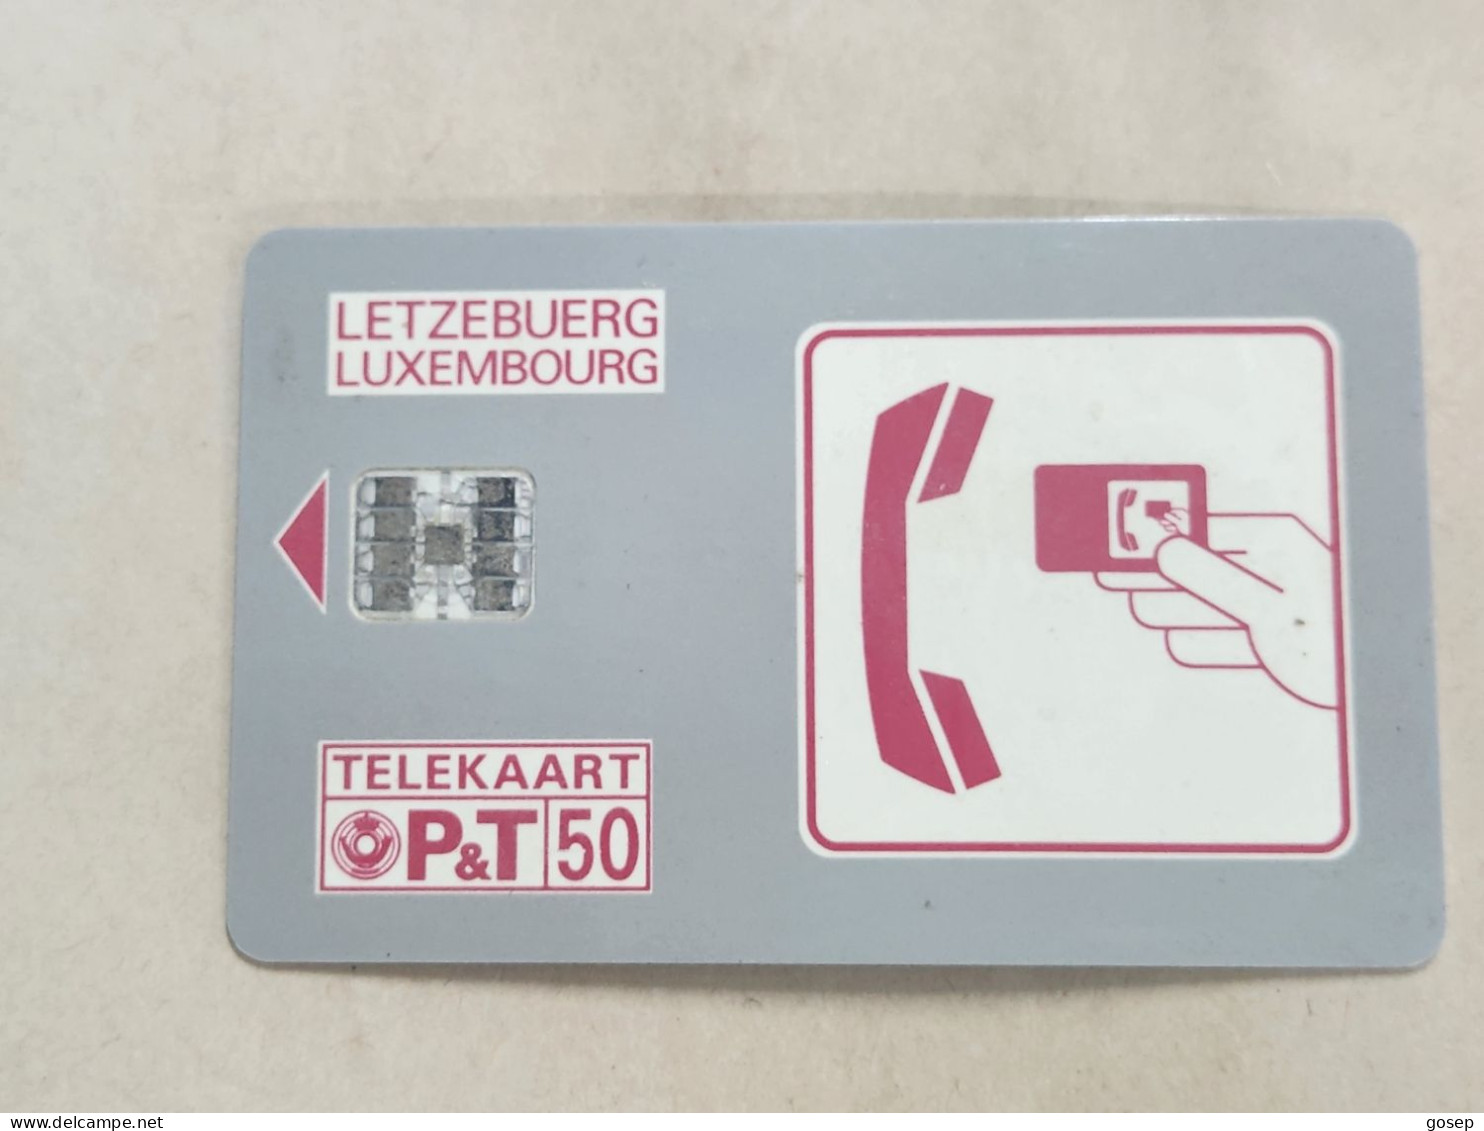 LUXEMBOURG-(SC01_D)-SERVICE 0800-(30)-(C42144137)-(50units)-(1.7.91)(tirage-180.000)-used Card - Lussemburgo